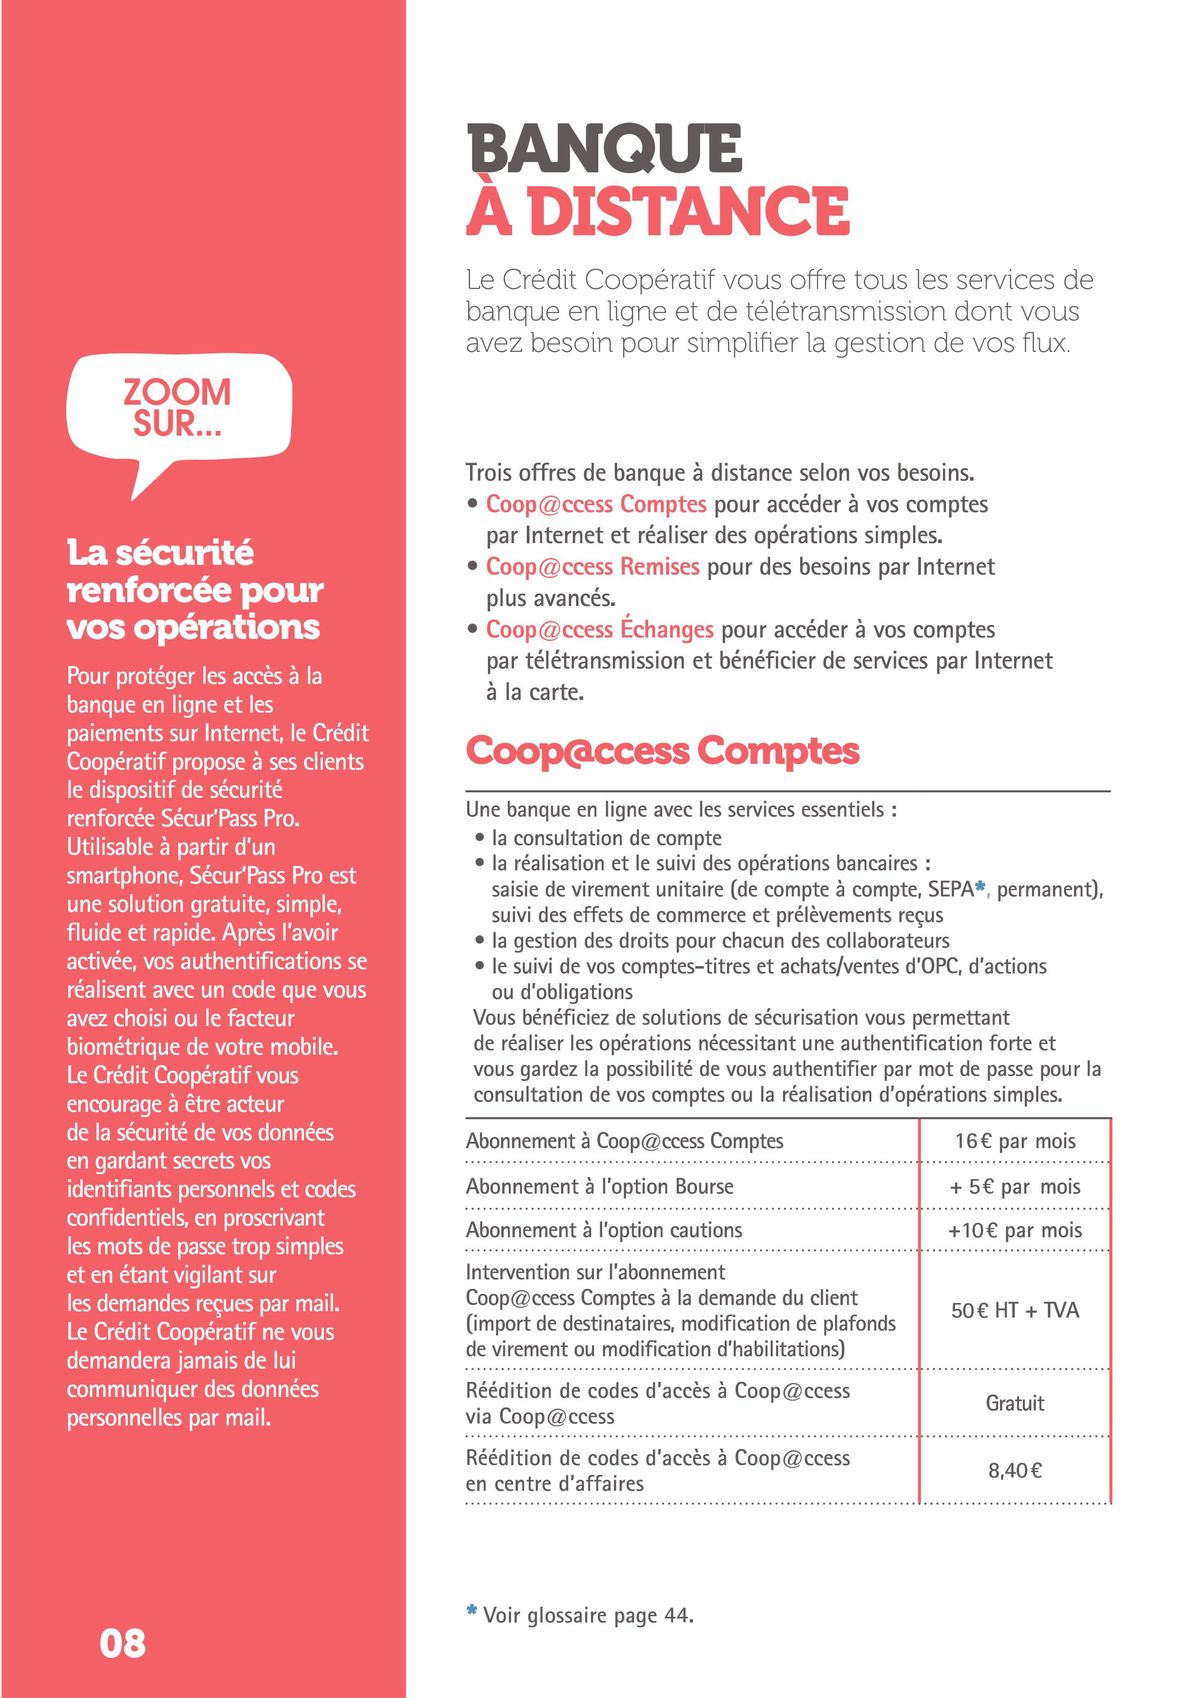 Catalogue Credit Cooperatif Guide tarifs bancaires 2023, page 00008